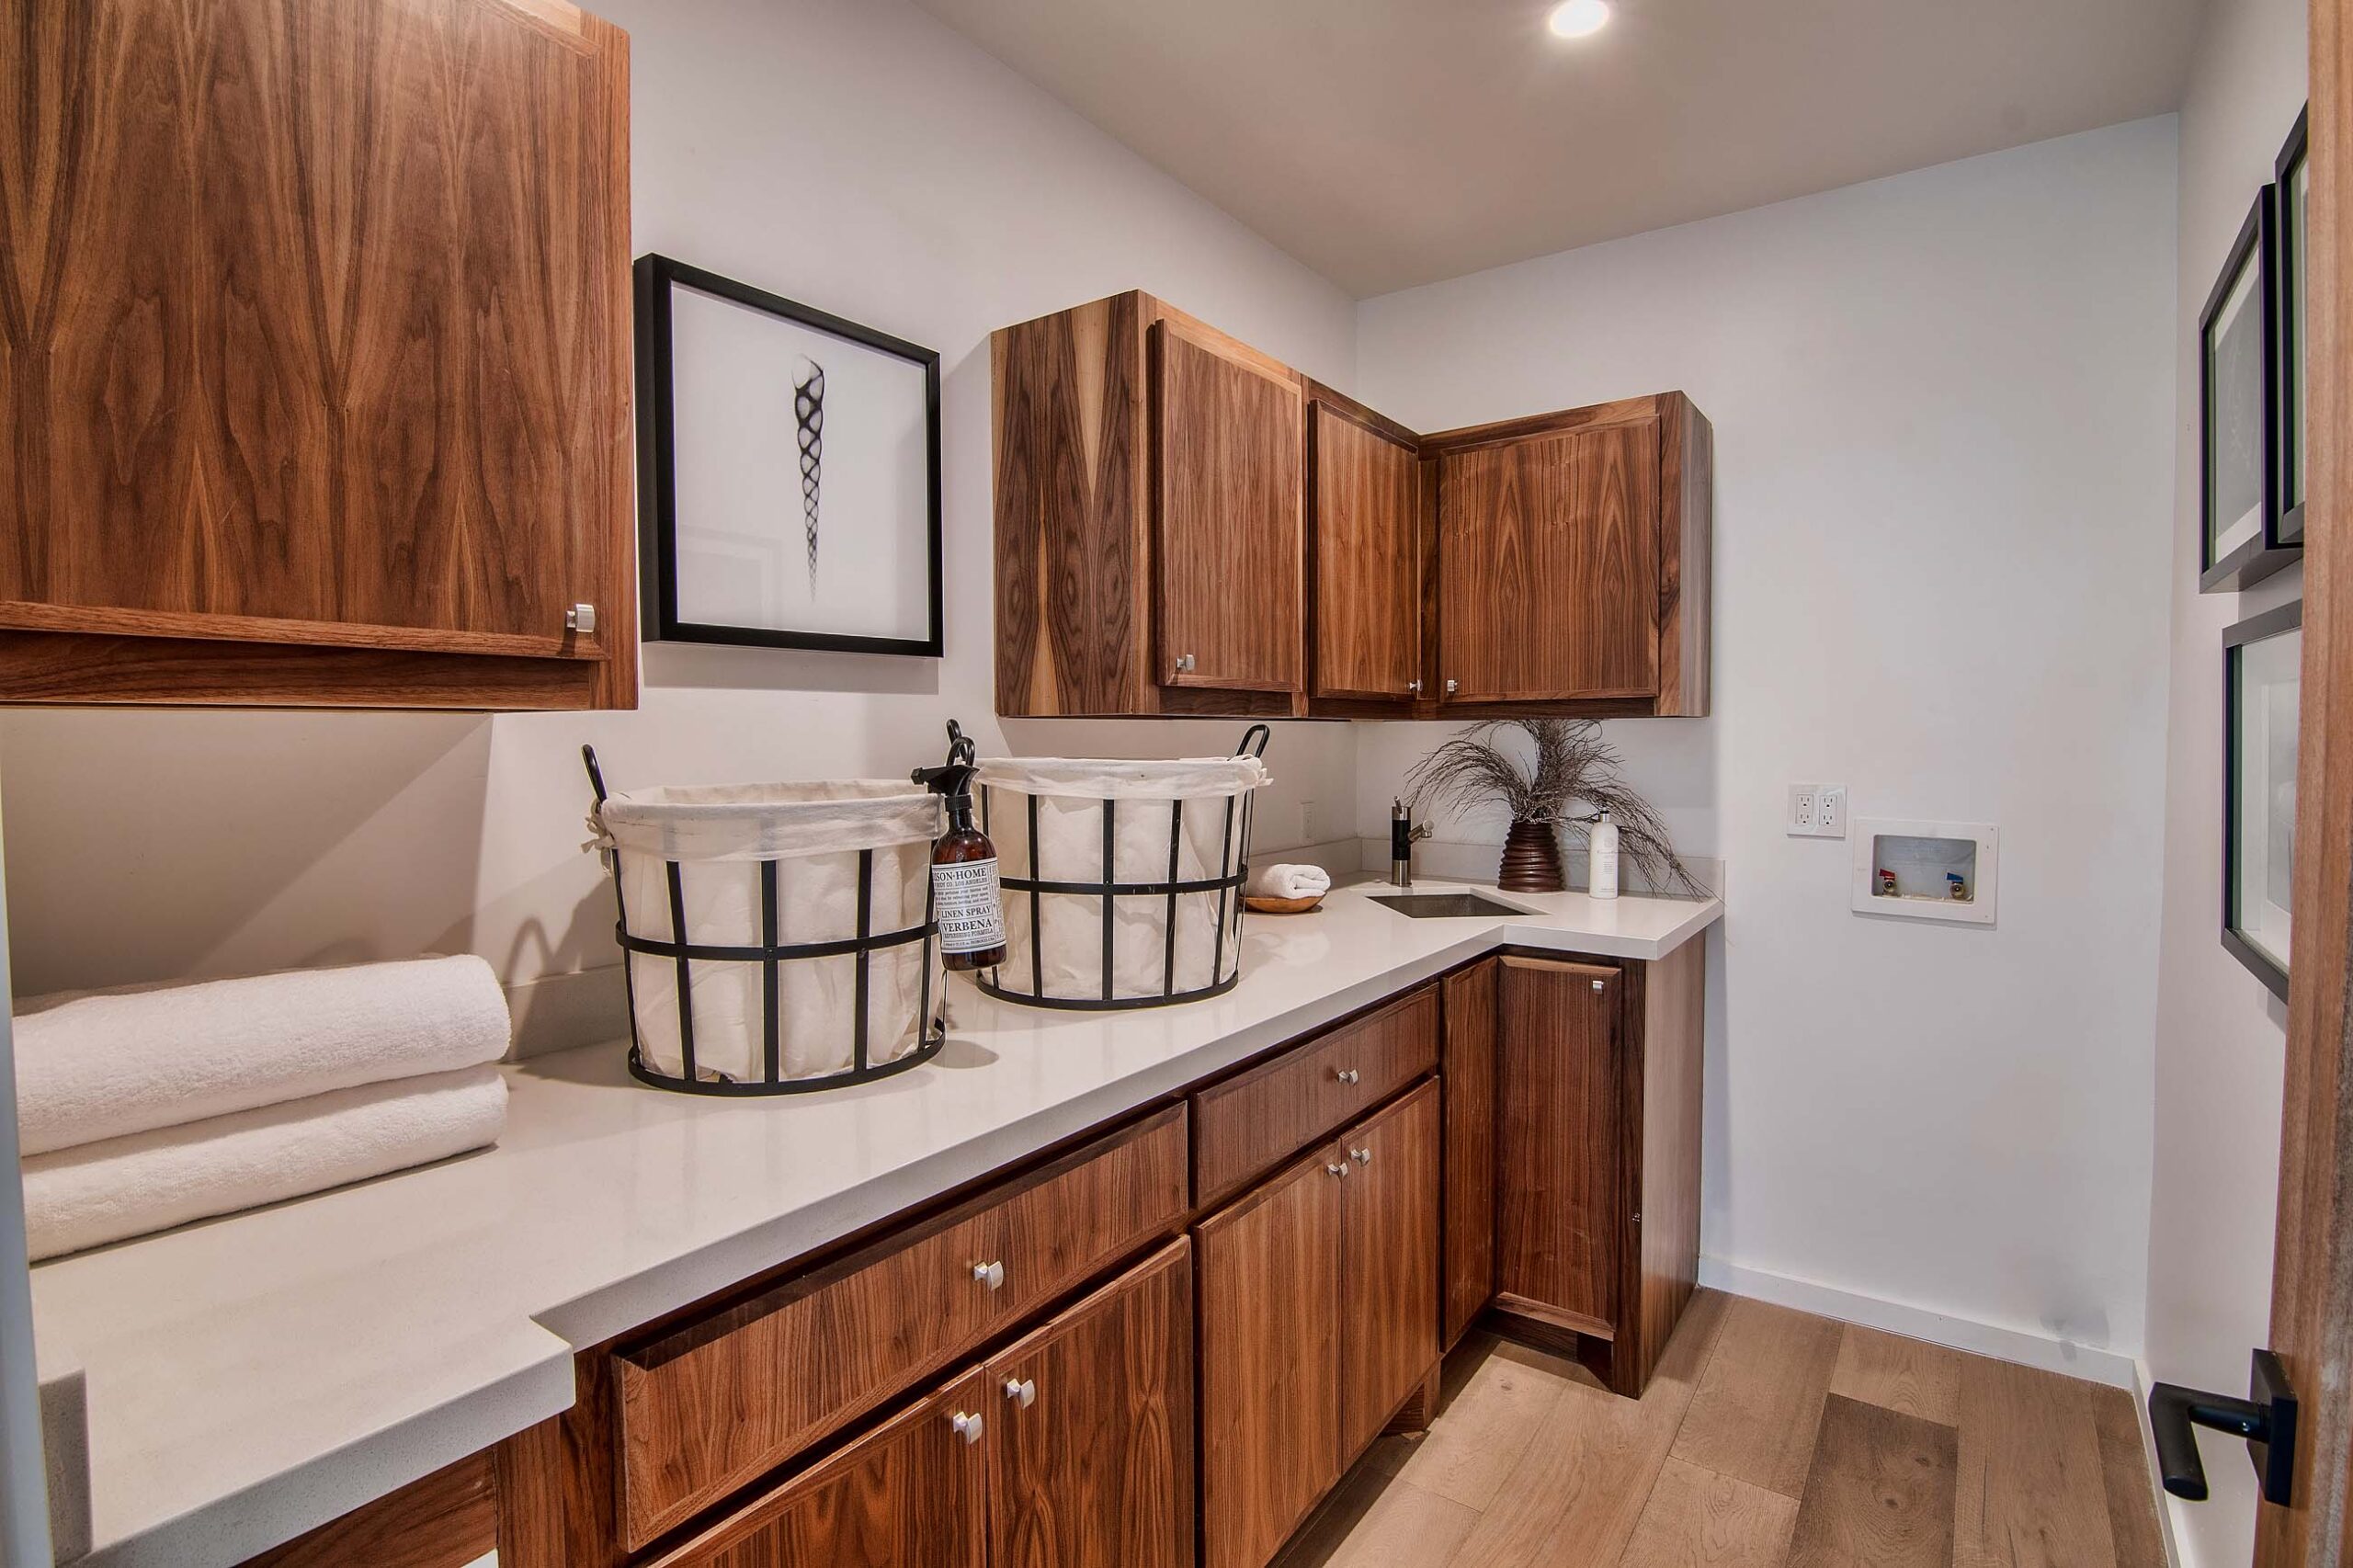 Spacious and well designed laundry room